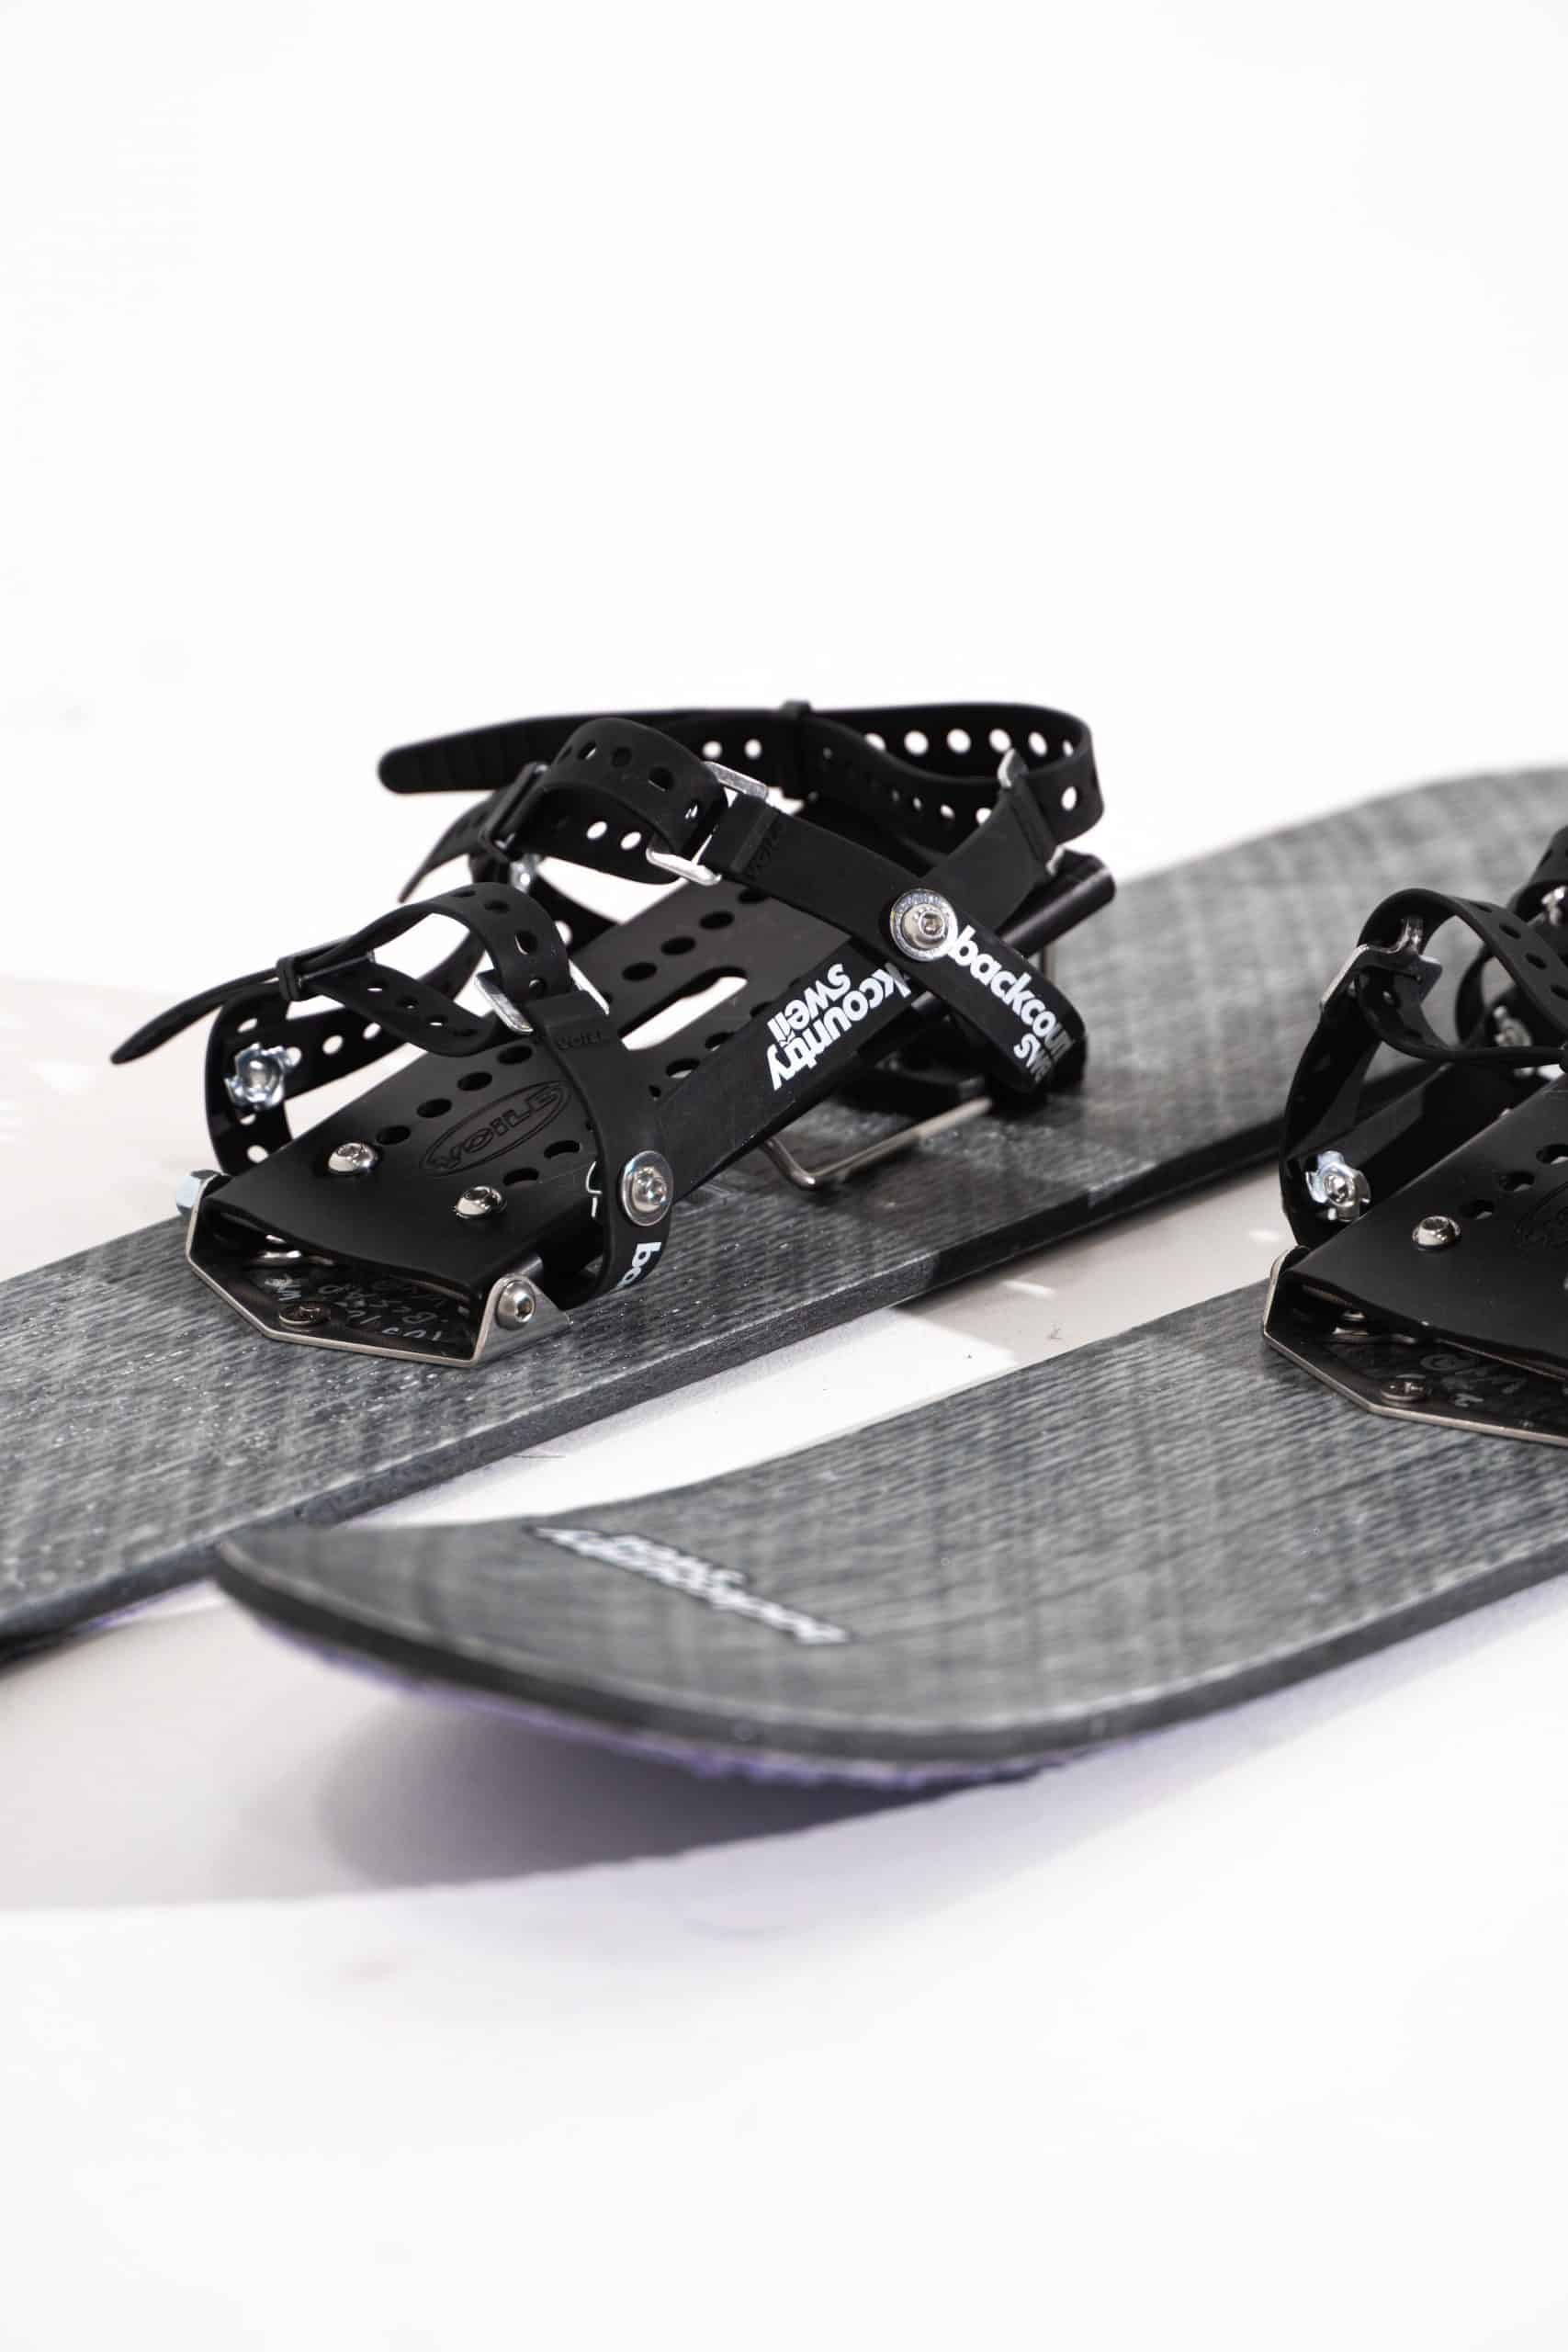 Crossblades split the difference between backcountry skis and snowshoes